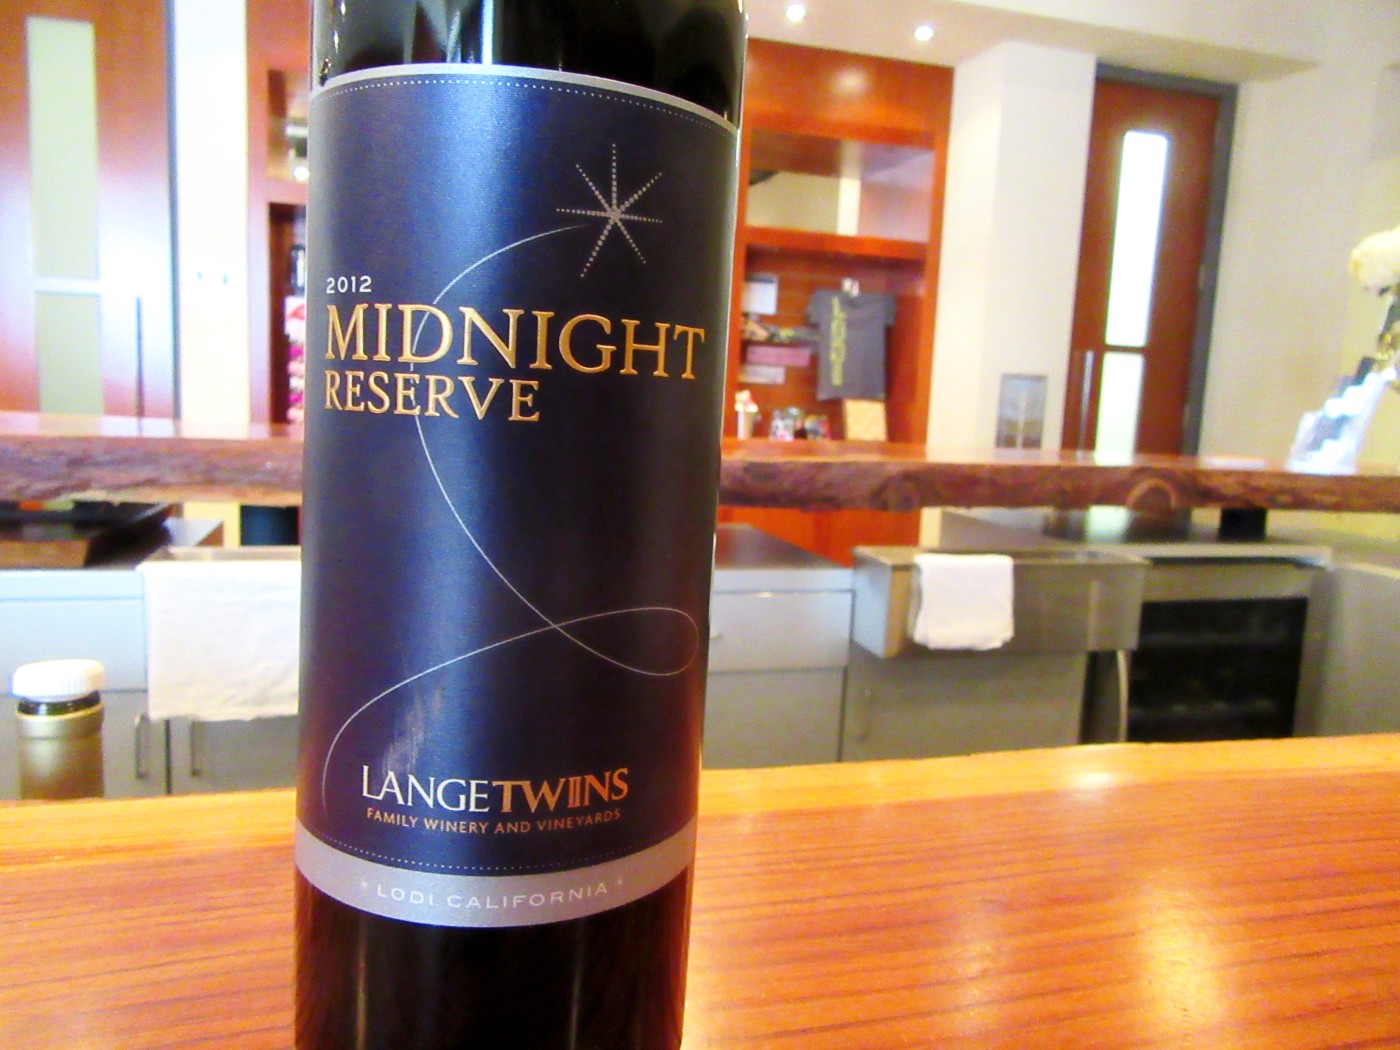 LangeTwins Family Winery and Vineyards, Midnight Reserve 2012, Lodi, California, Wine Casual